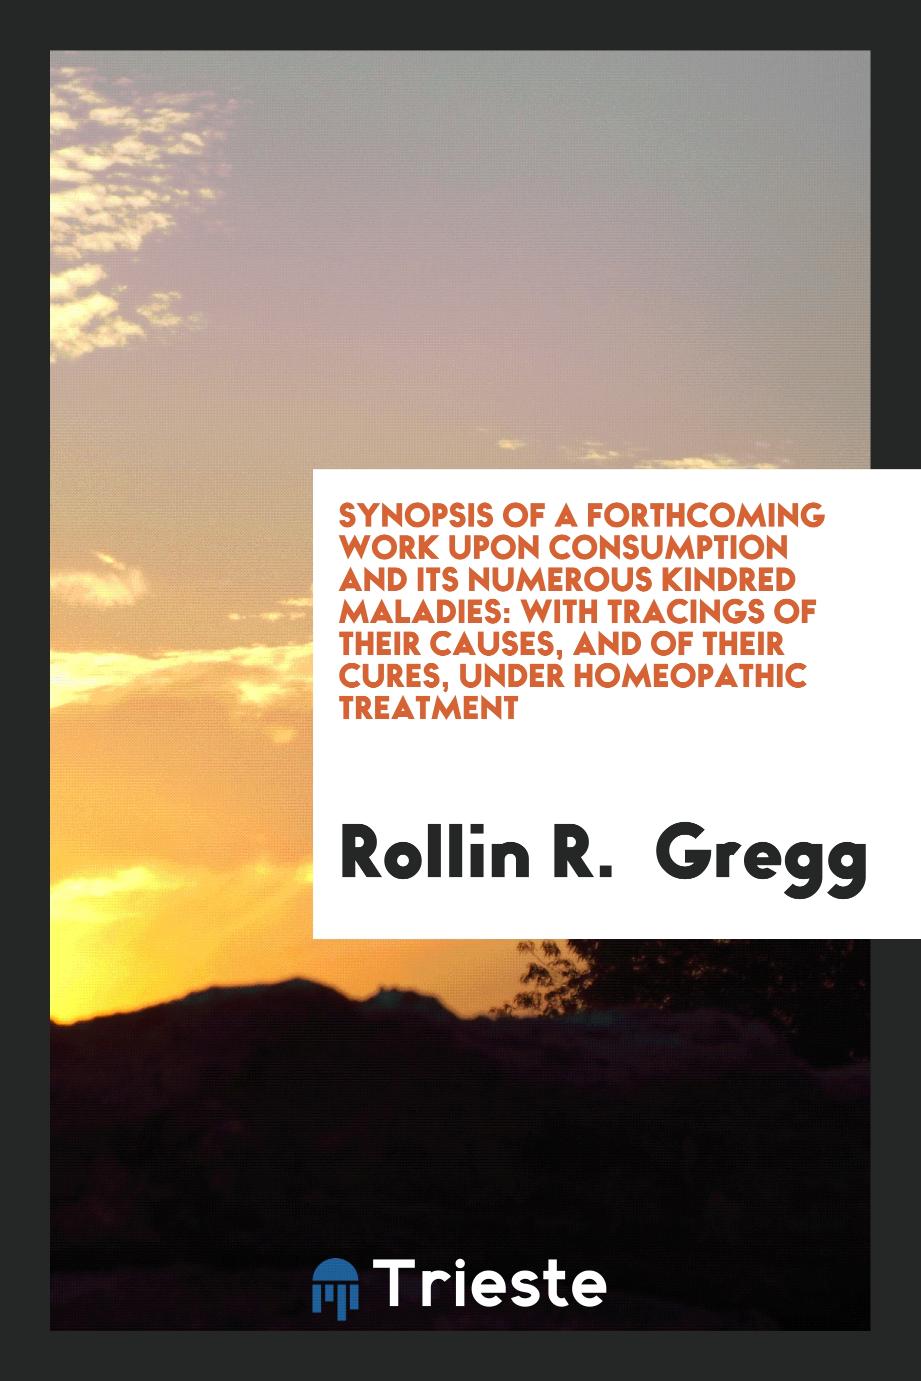 Synopsis of a Forthcoming Work Upon Consumption and Its Numerous Kindred Maladies: with tracings of their causes, and of their cures, under homeopathic treatment